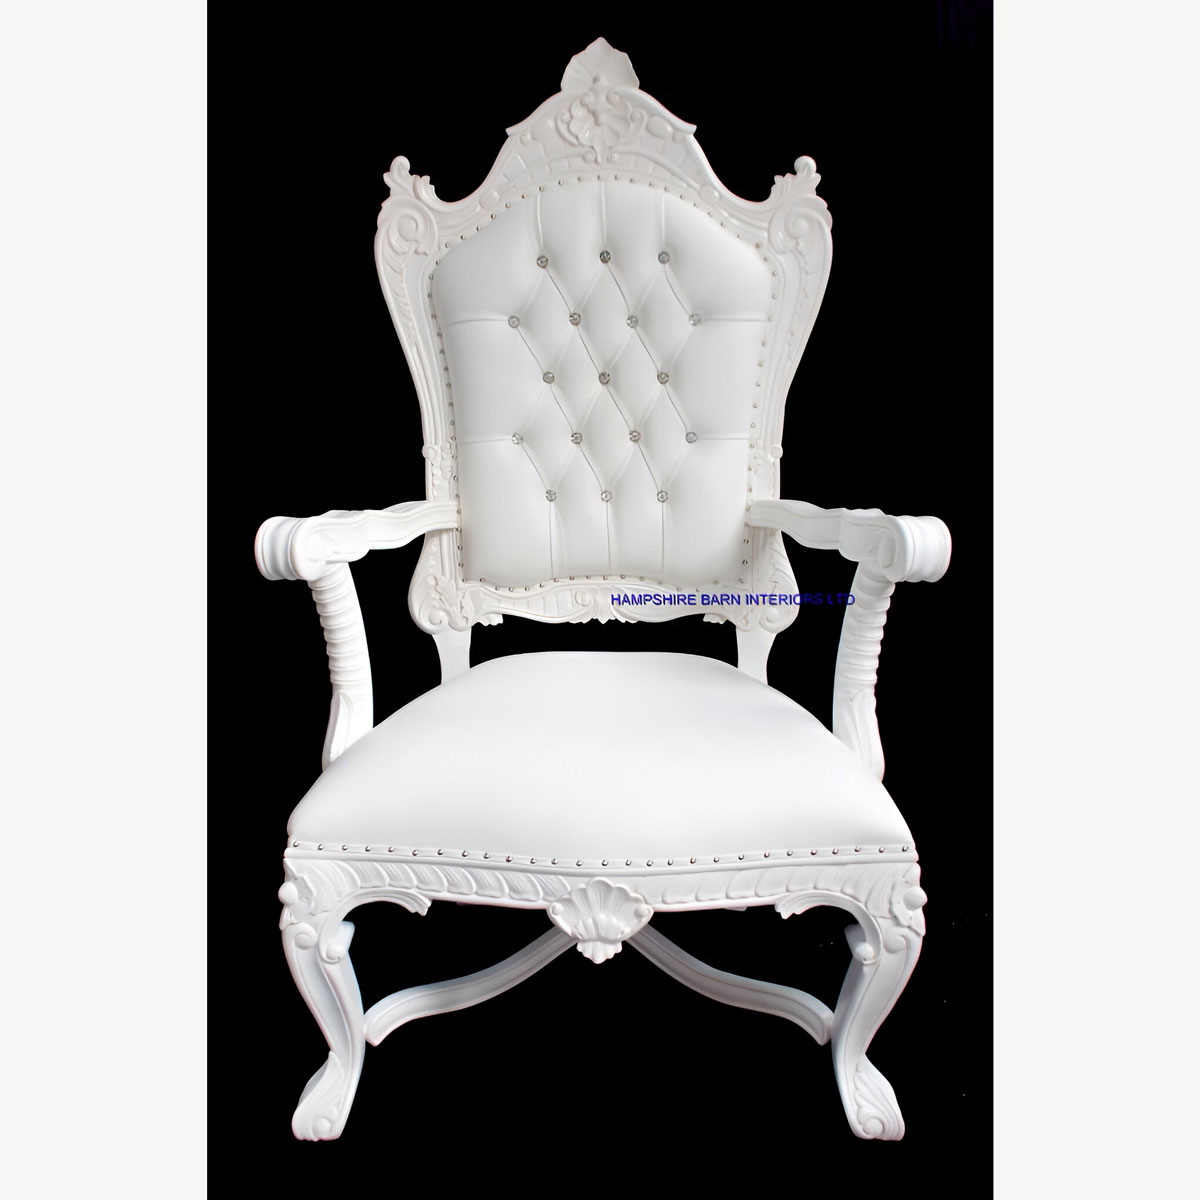 Diamond Trono Ultimo Di Diamante In White And White Faux Leather Upholstery Kings Throne 1 - Hampshire Barn Interiors - Home - Hampshire Barn Interiors News